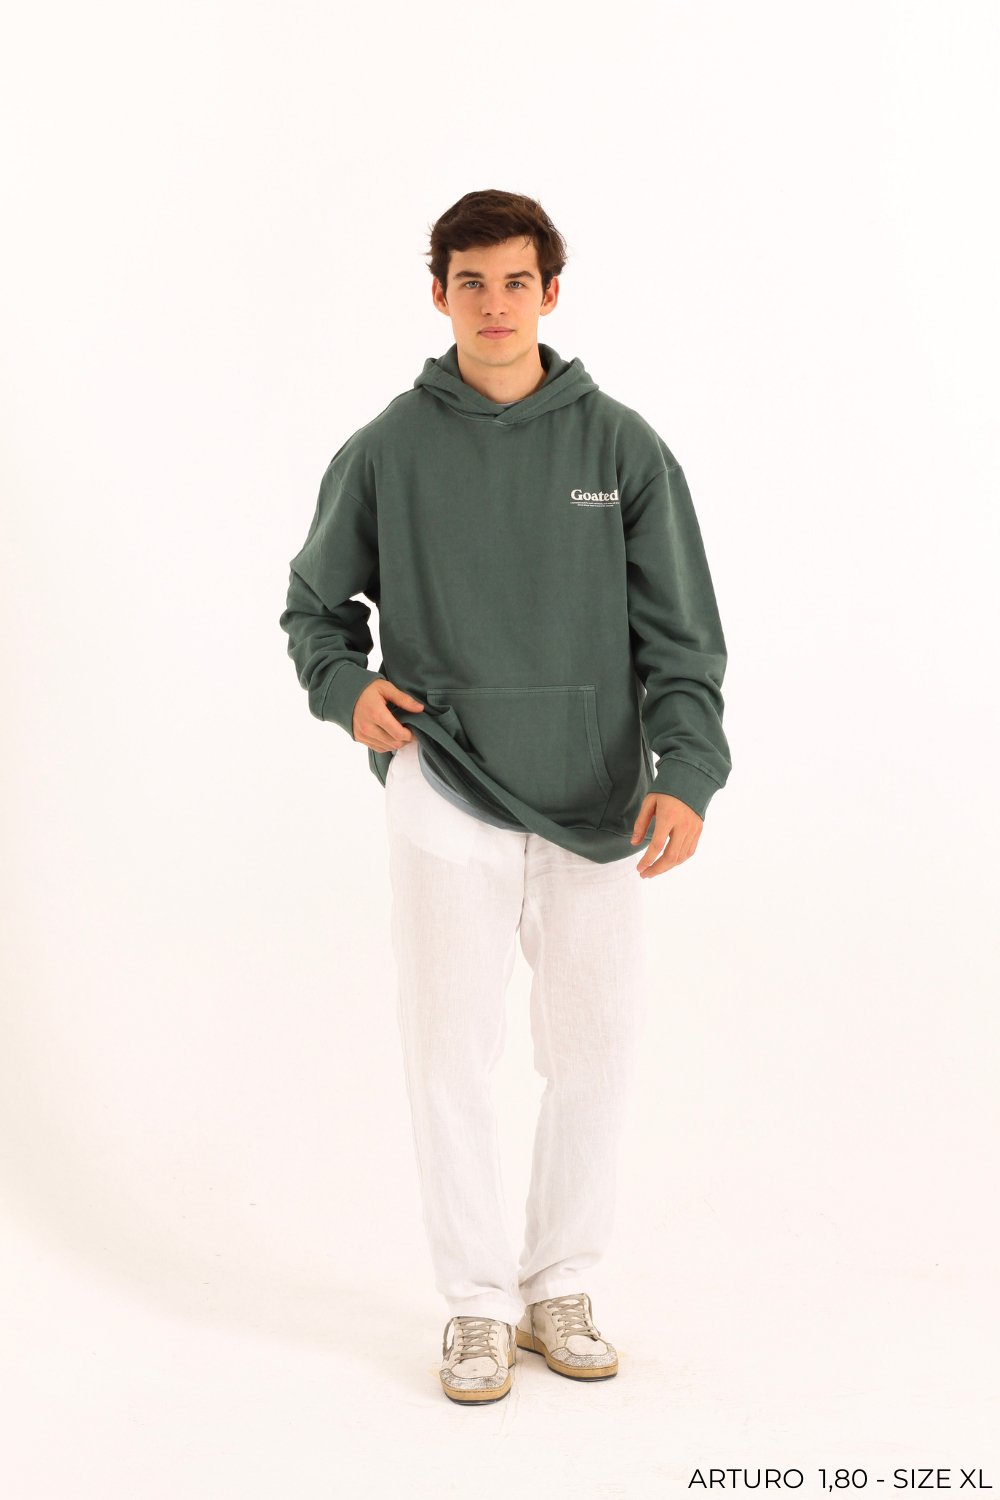 Goated Hoodie - Garden Topiary - 1026